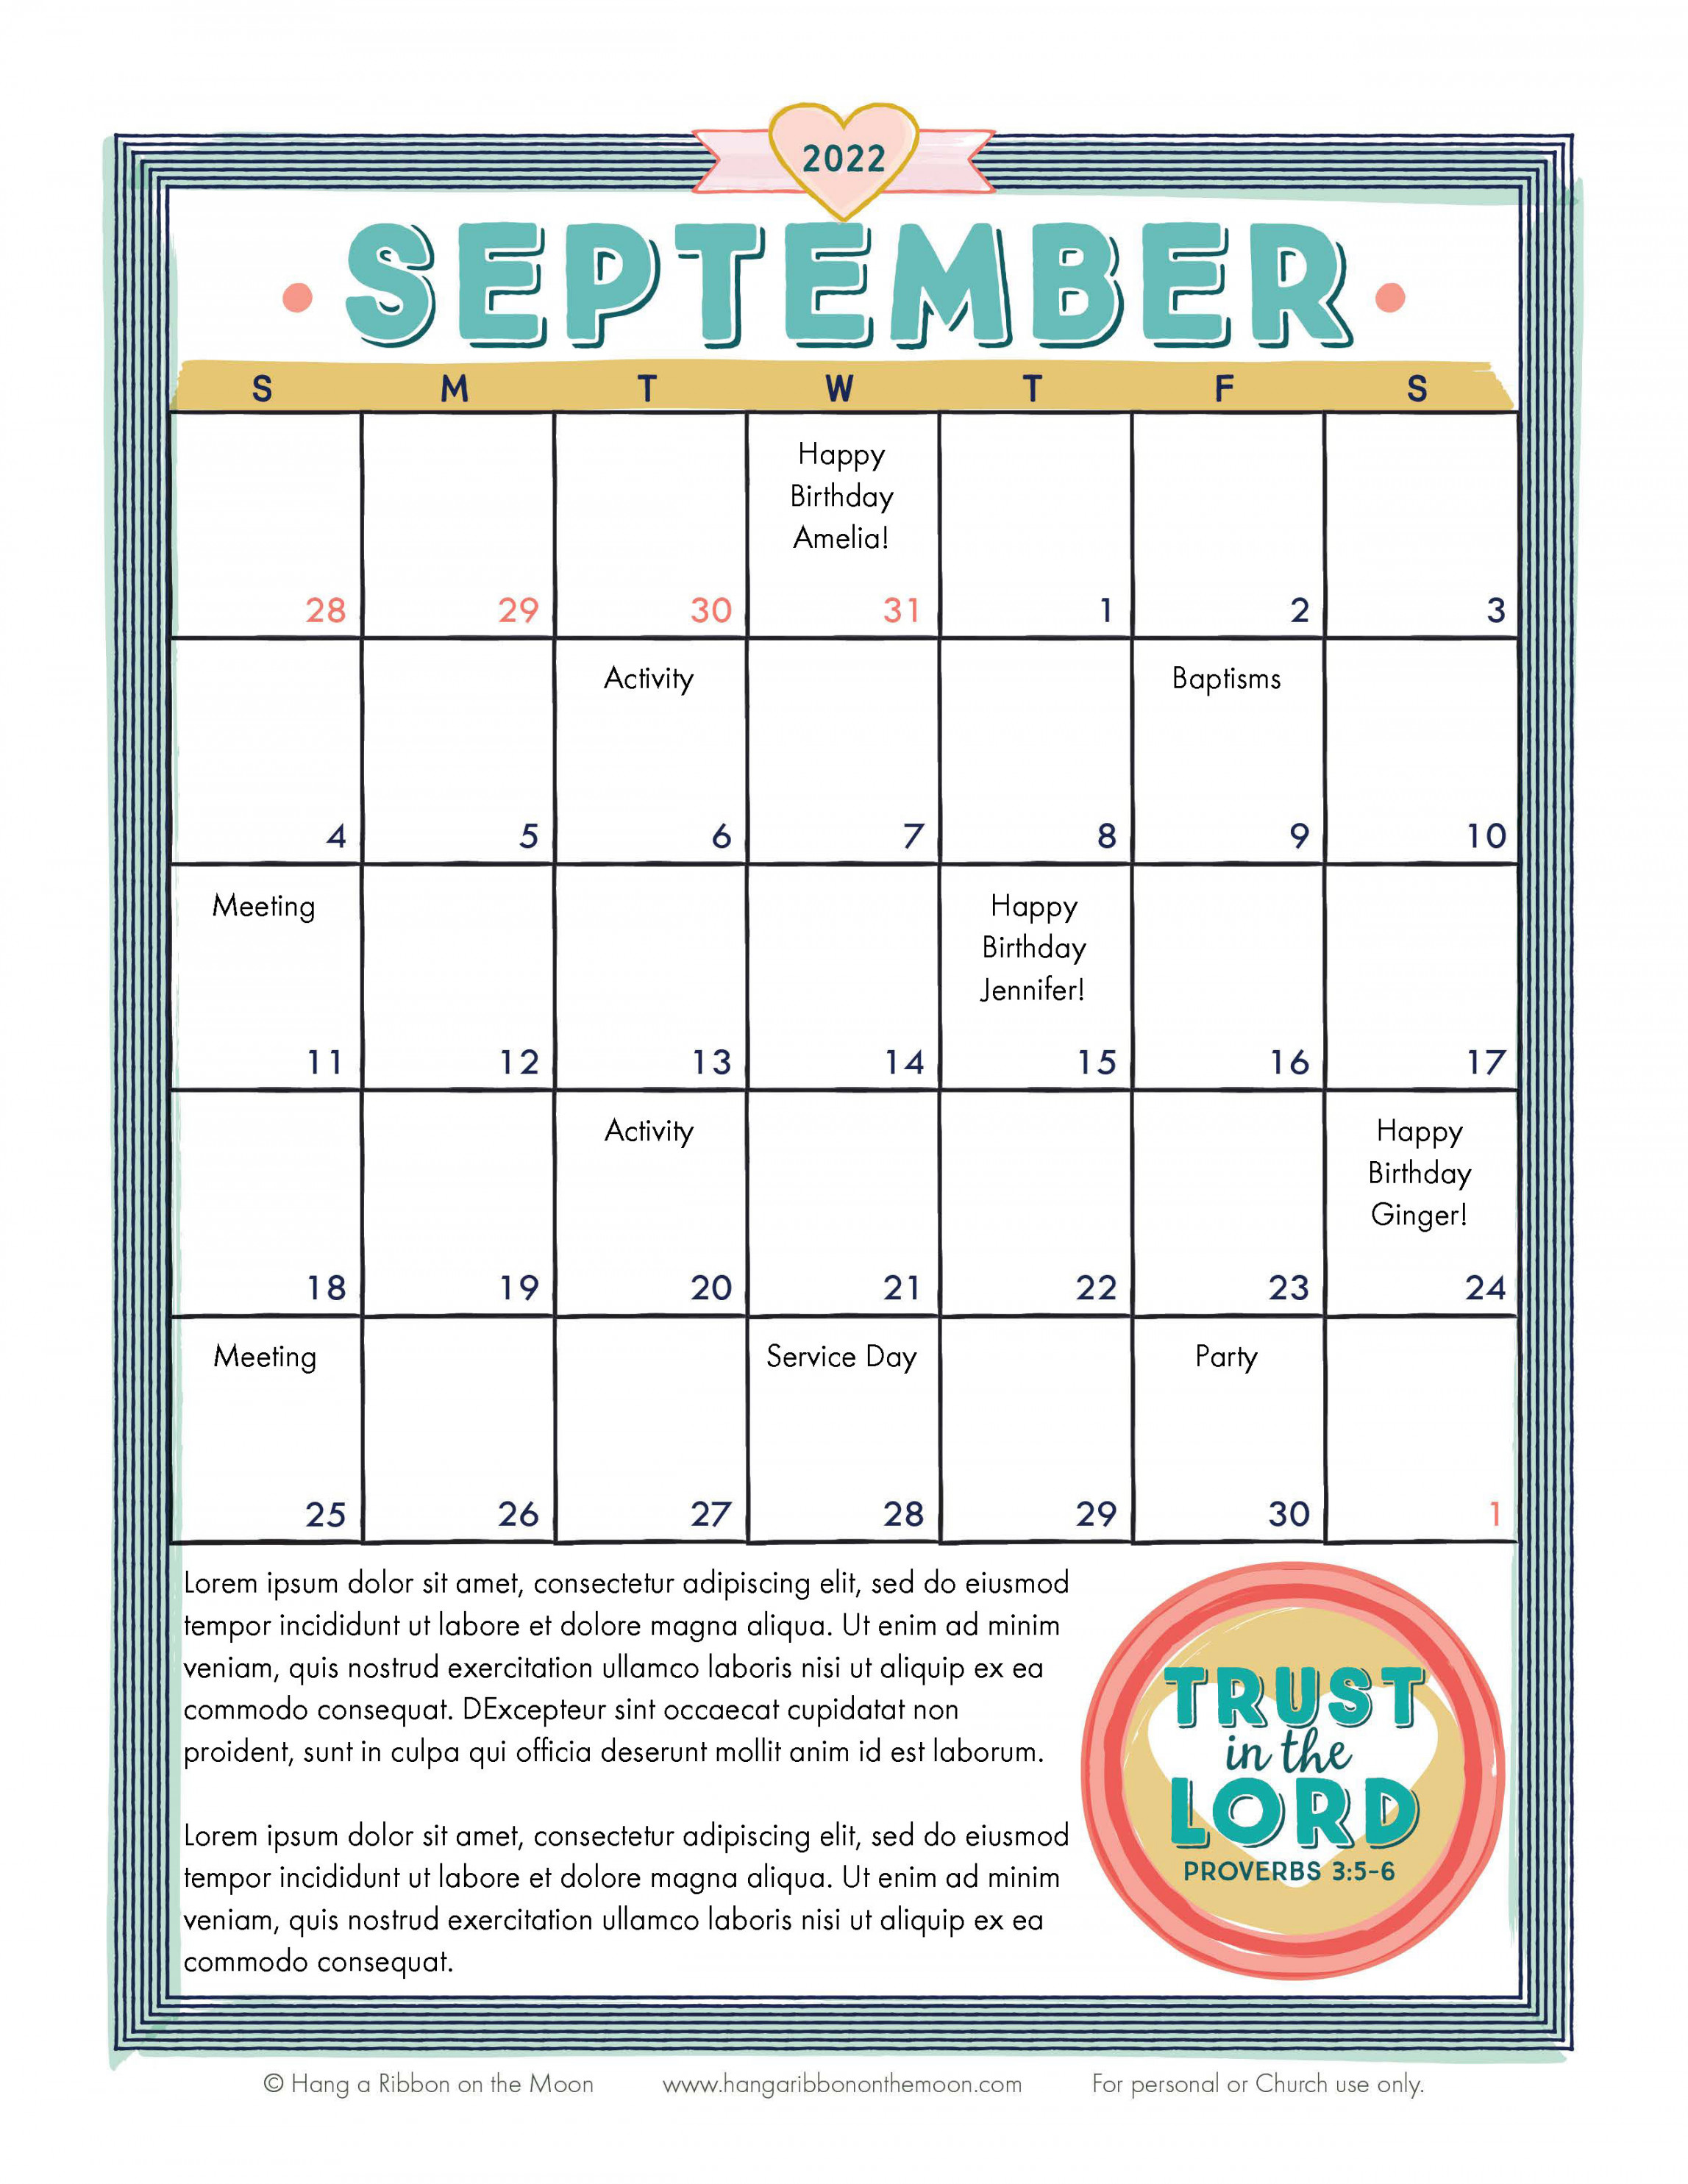 Youth Theme Trust in the Lord Calendars: Editable PDF & JPEG